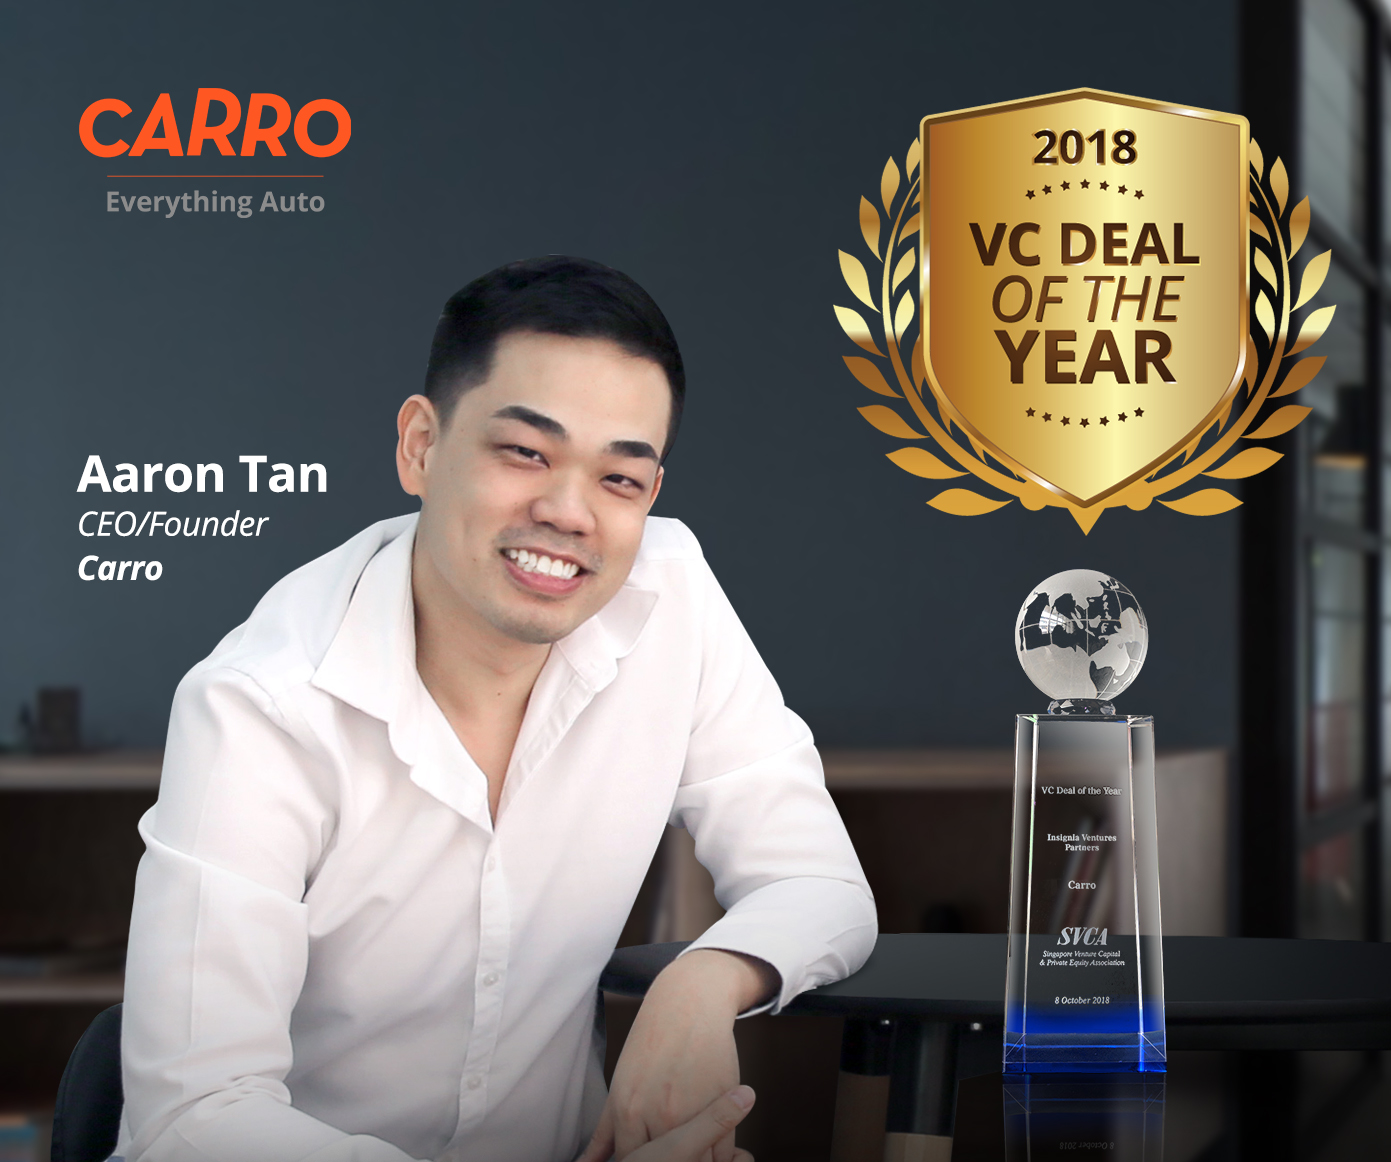 VC Deal of the Year award 2018